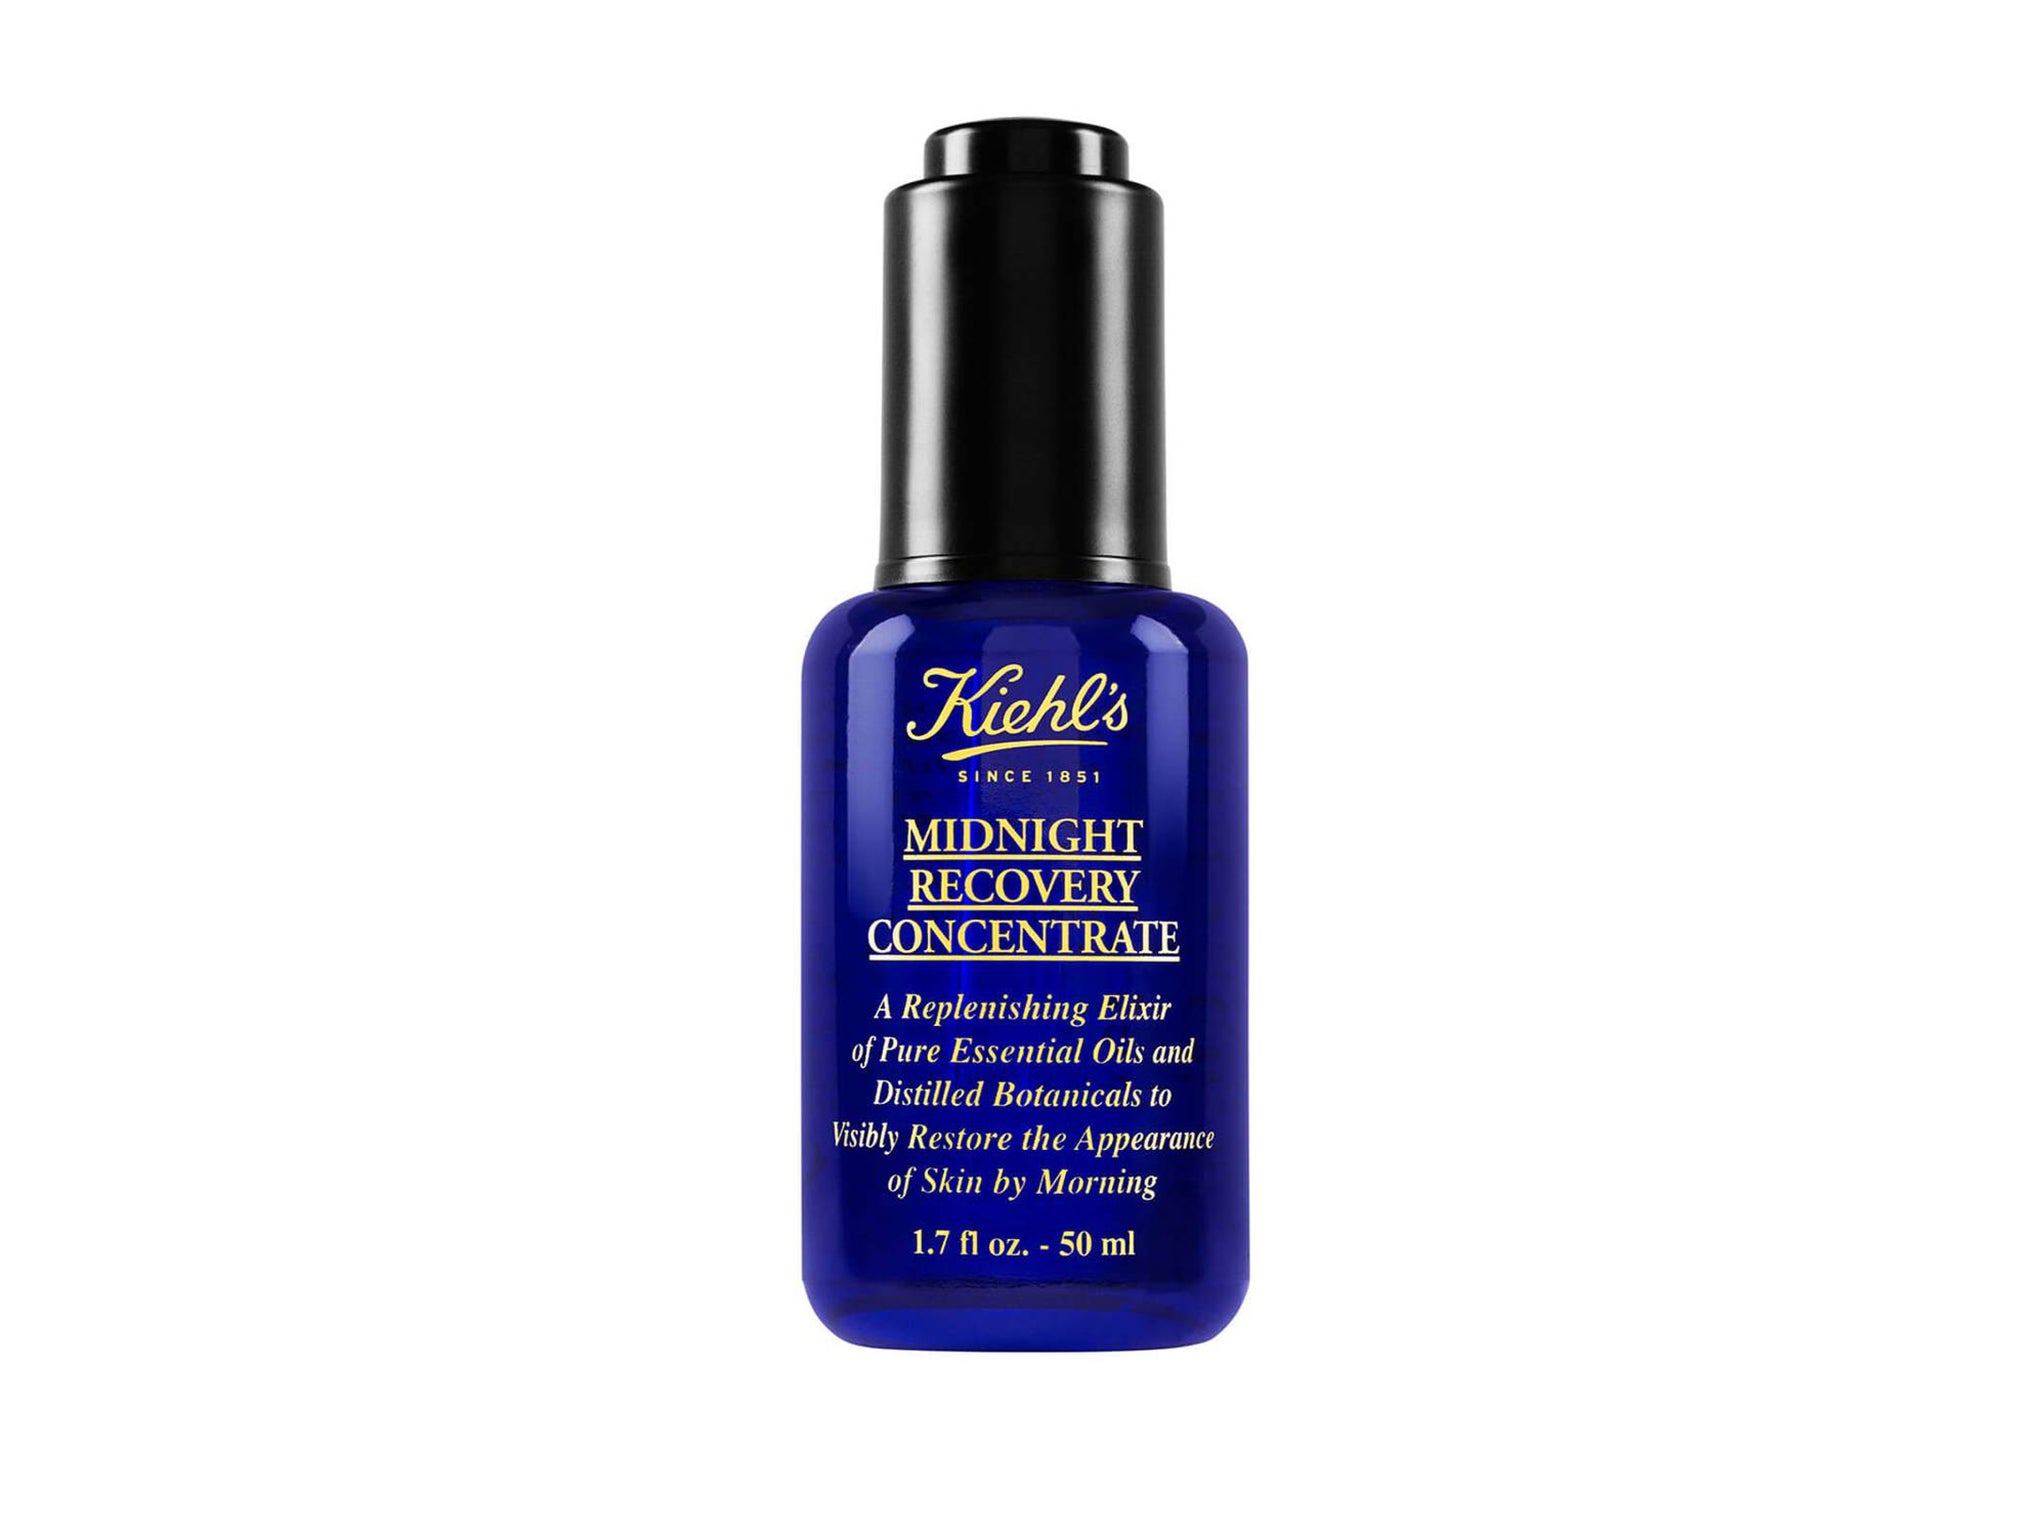 kiehls midnight recovery concentrate.jpg